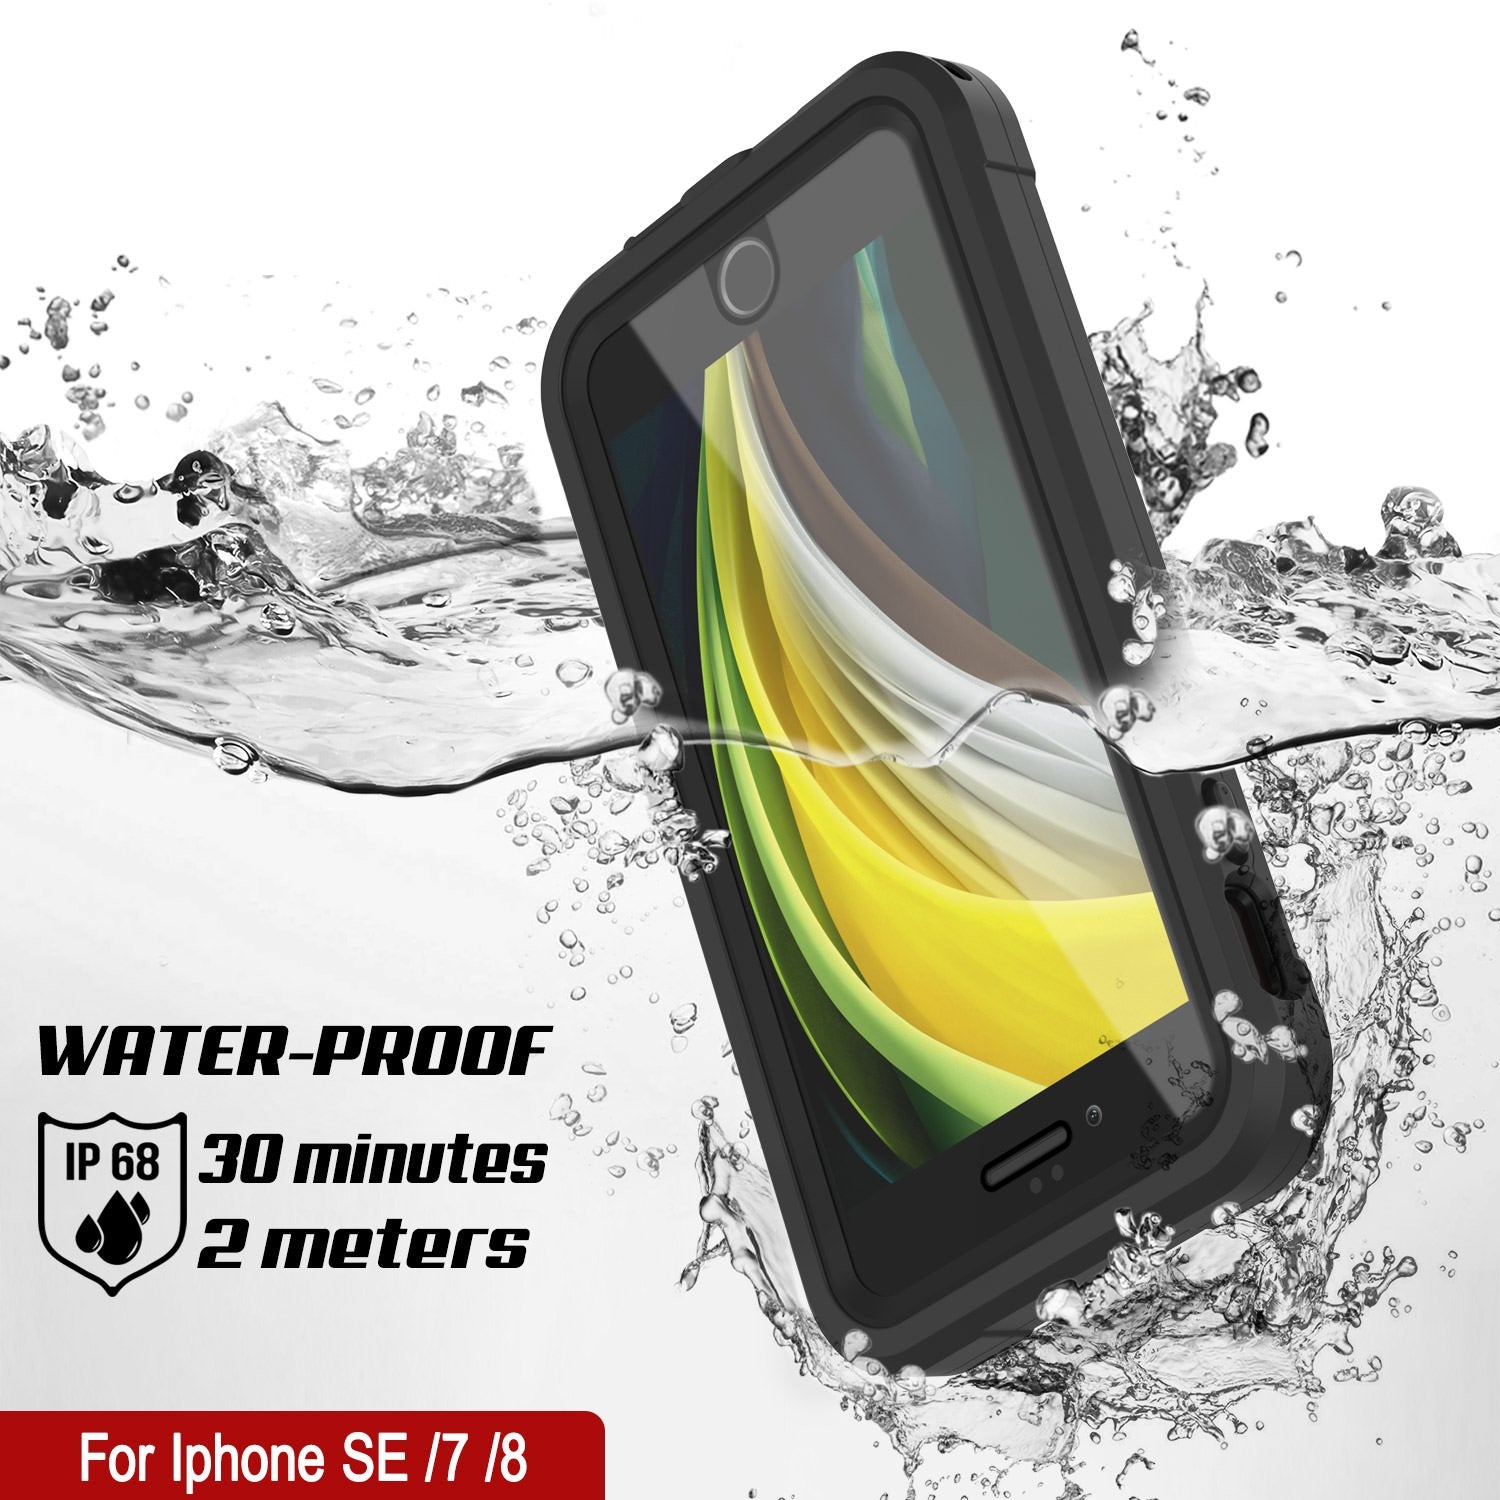 iPhone 7 Waterproof IP68 Case, Punkcase [Black]  [Maximus Series] [Slim Fit] [IP68 Certified] [Shockresistant] Clear Armor Cover with Screen Protector | Ultimate Protection